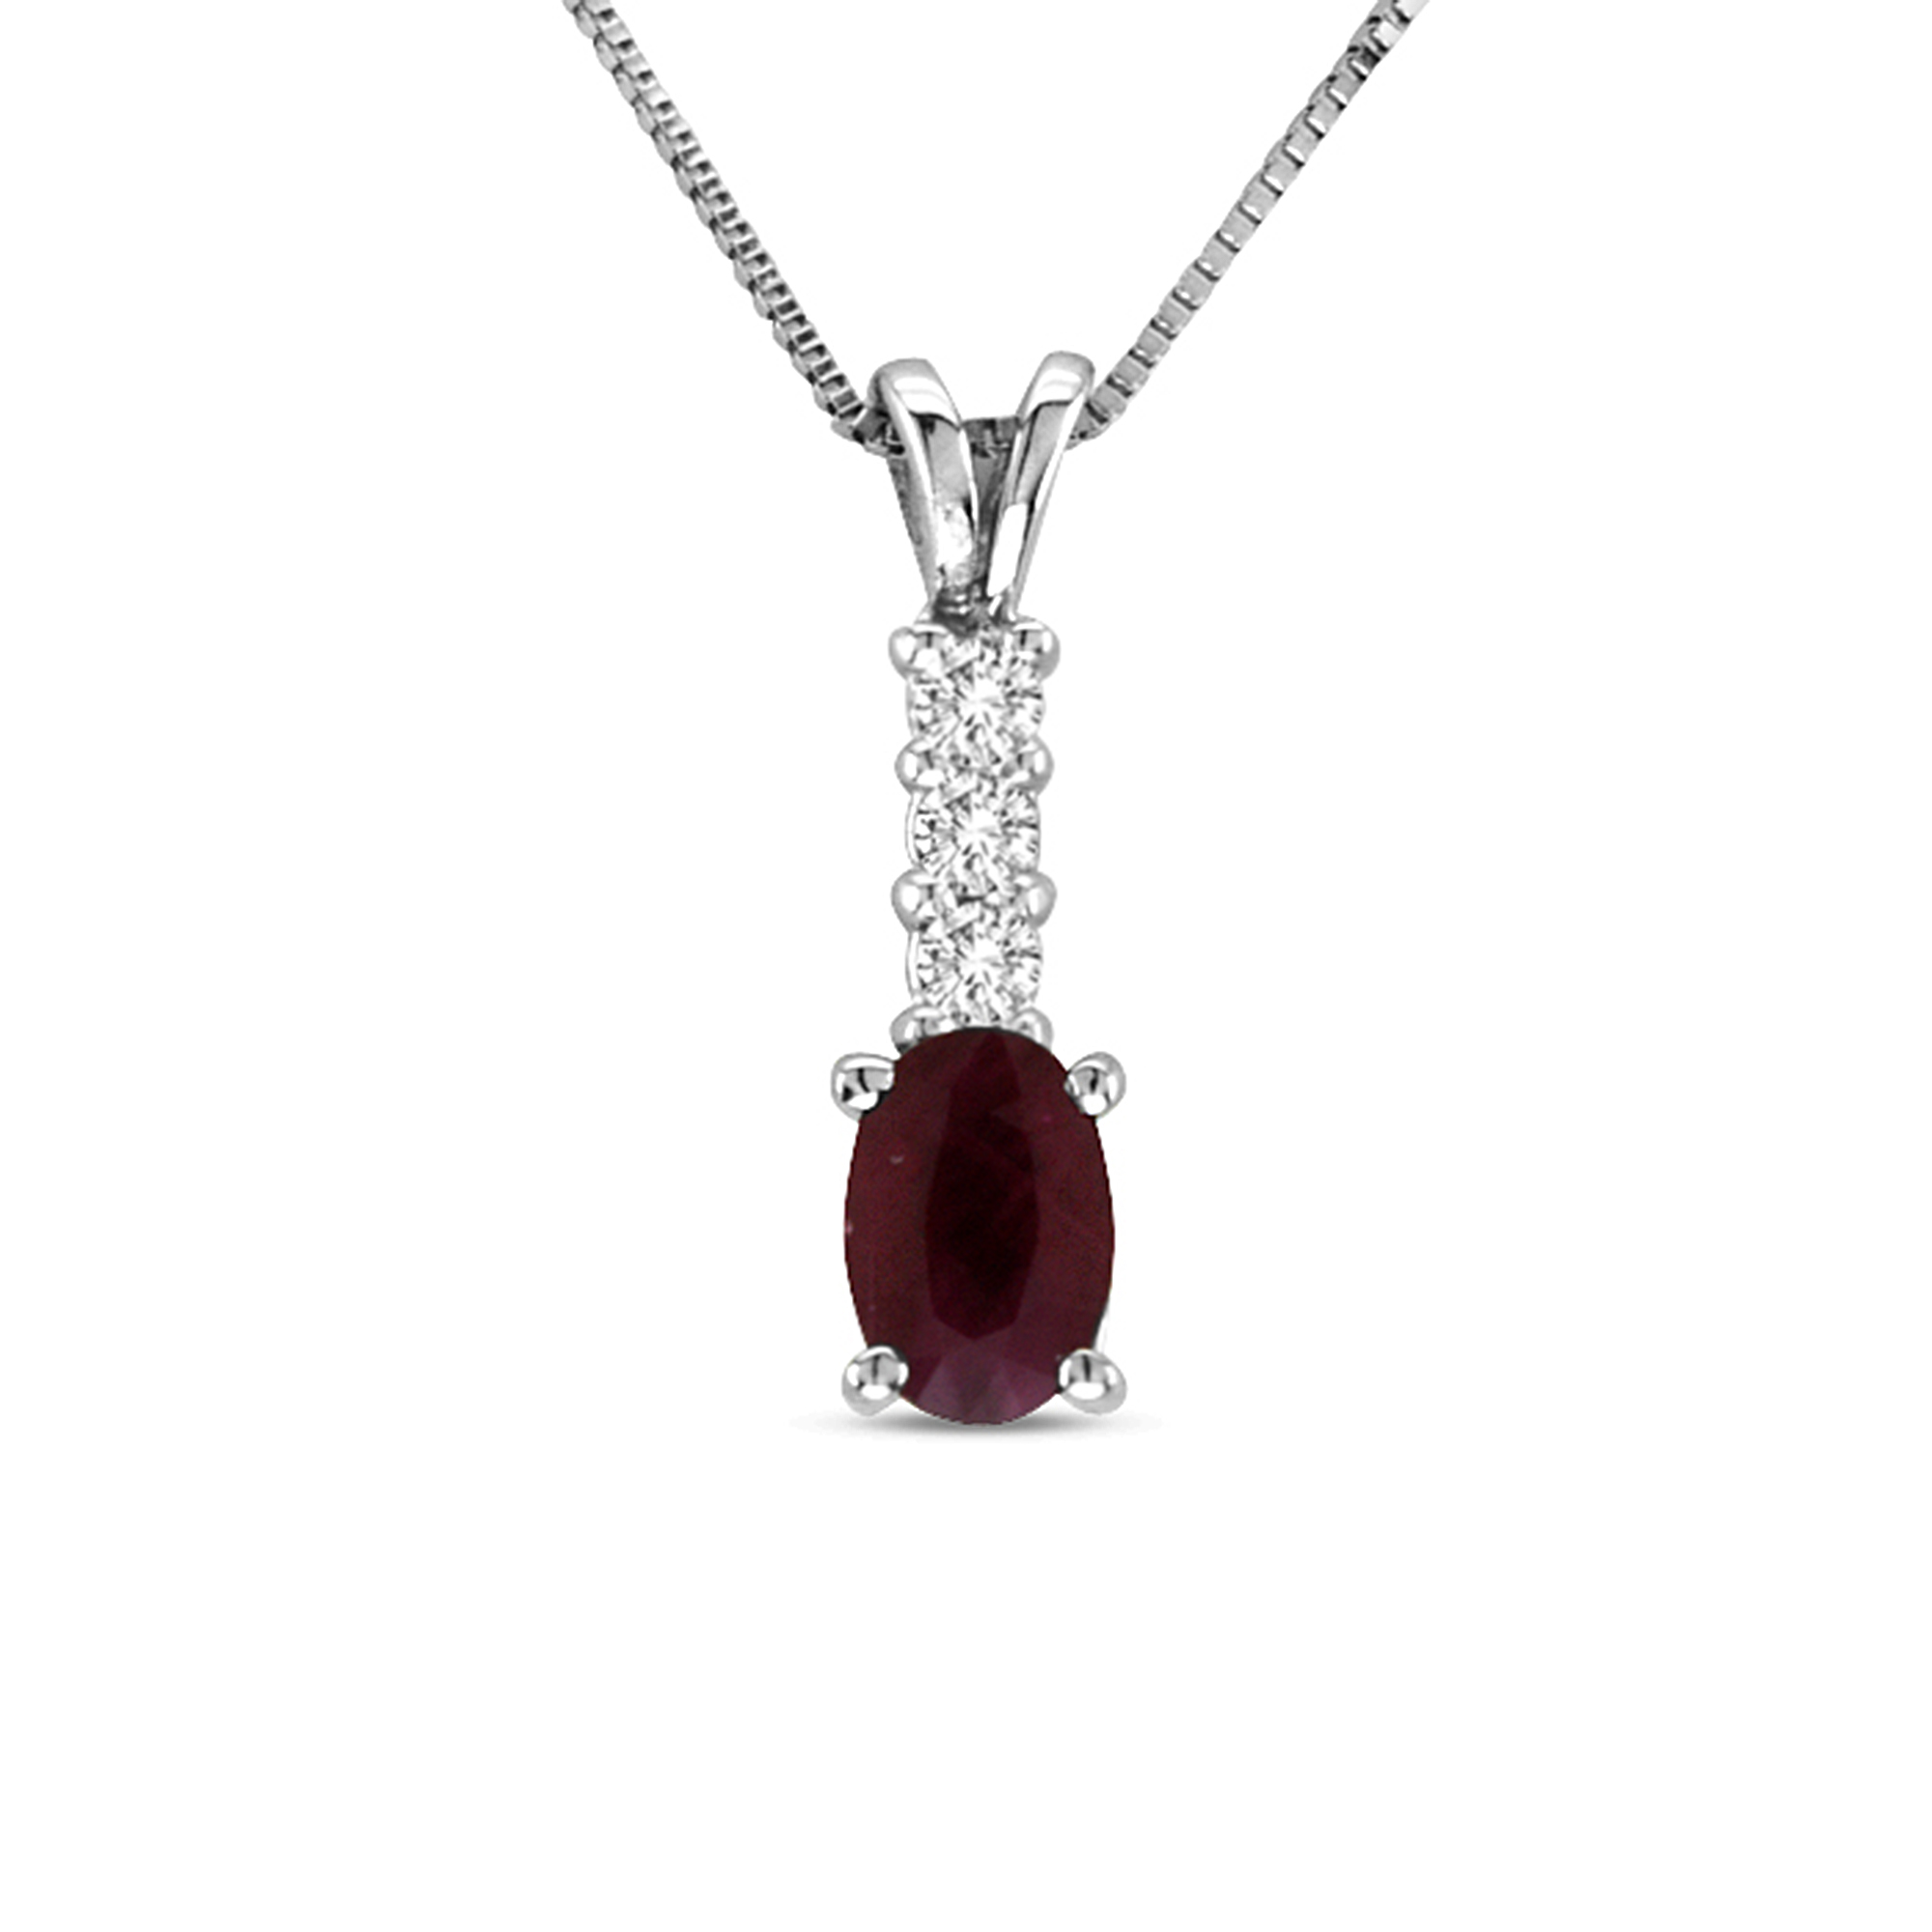 0.59cttw Ruby and Diamond Pendant in 14k Gold